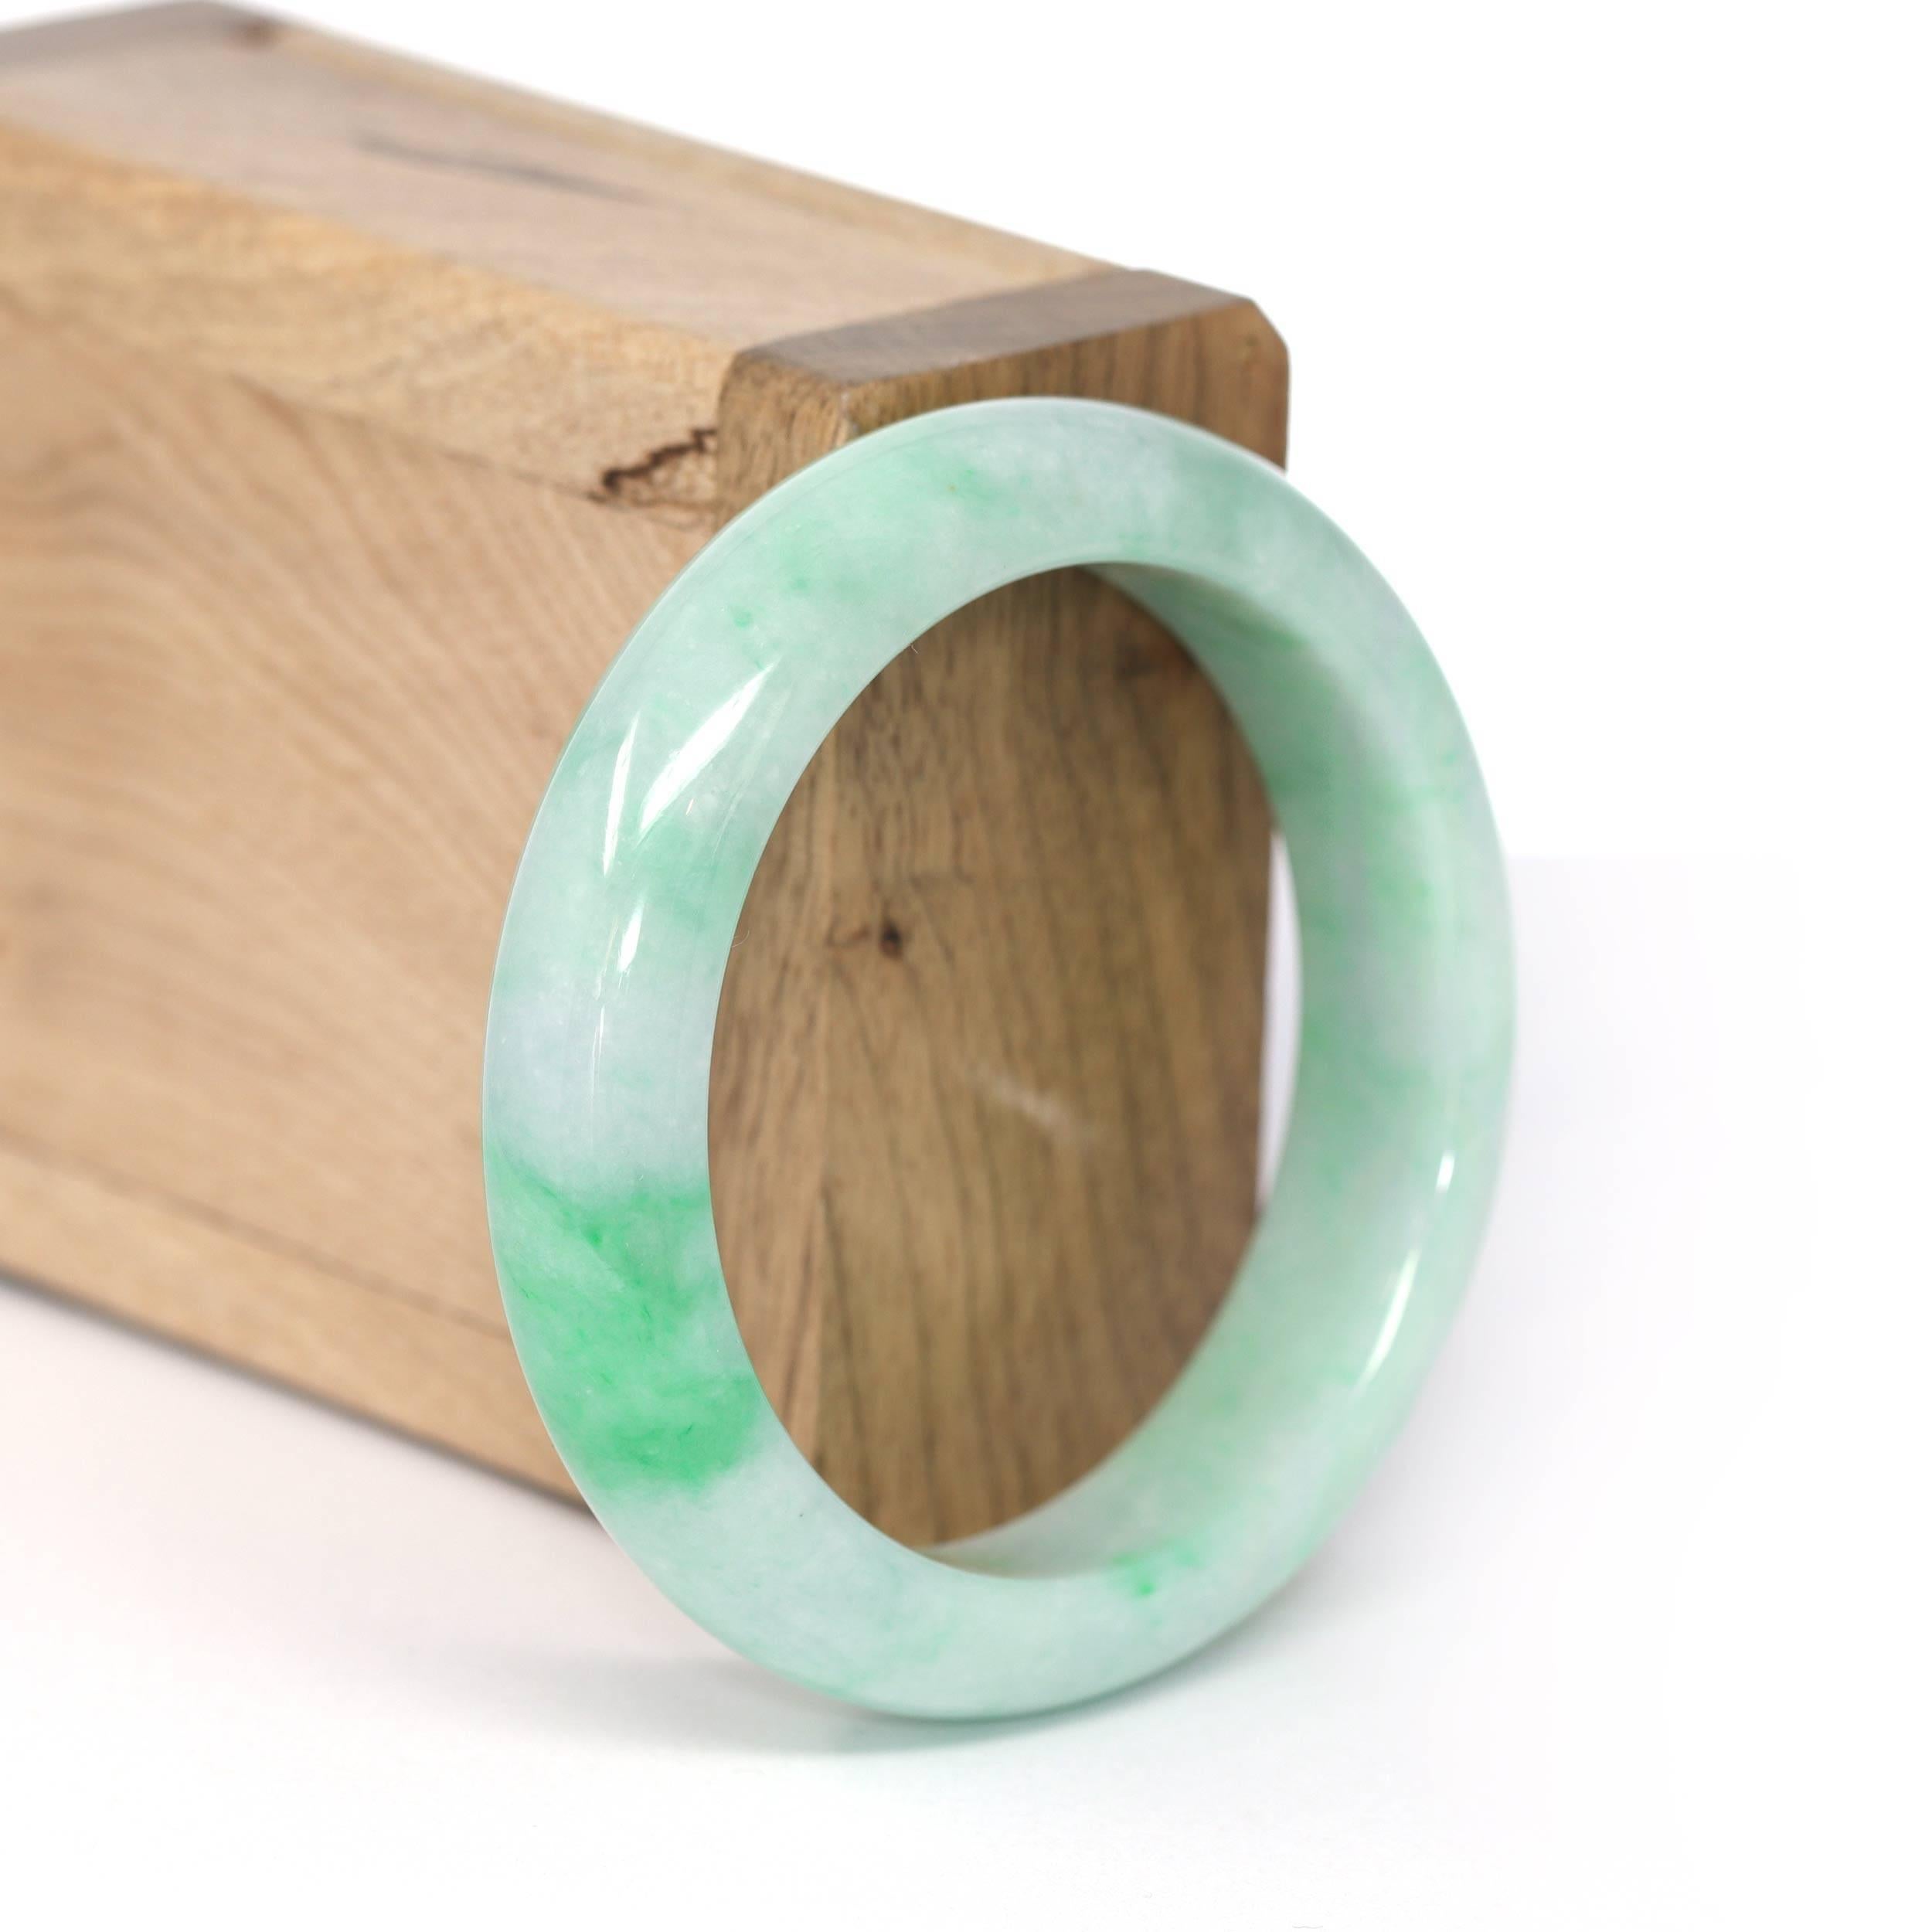 * DETAILS--- Genuine Burmese Jadeite Jade Bangle Bracelet. This bangle is made with very high-quality genuine Burmese green Jadeite jade, the jade texture is transparent and smooth. The green color is truly a mesmerizing combination. The Classic